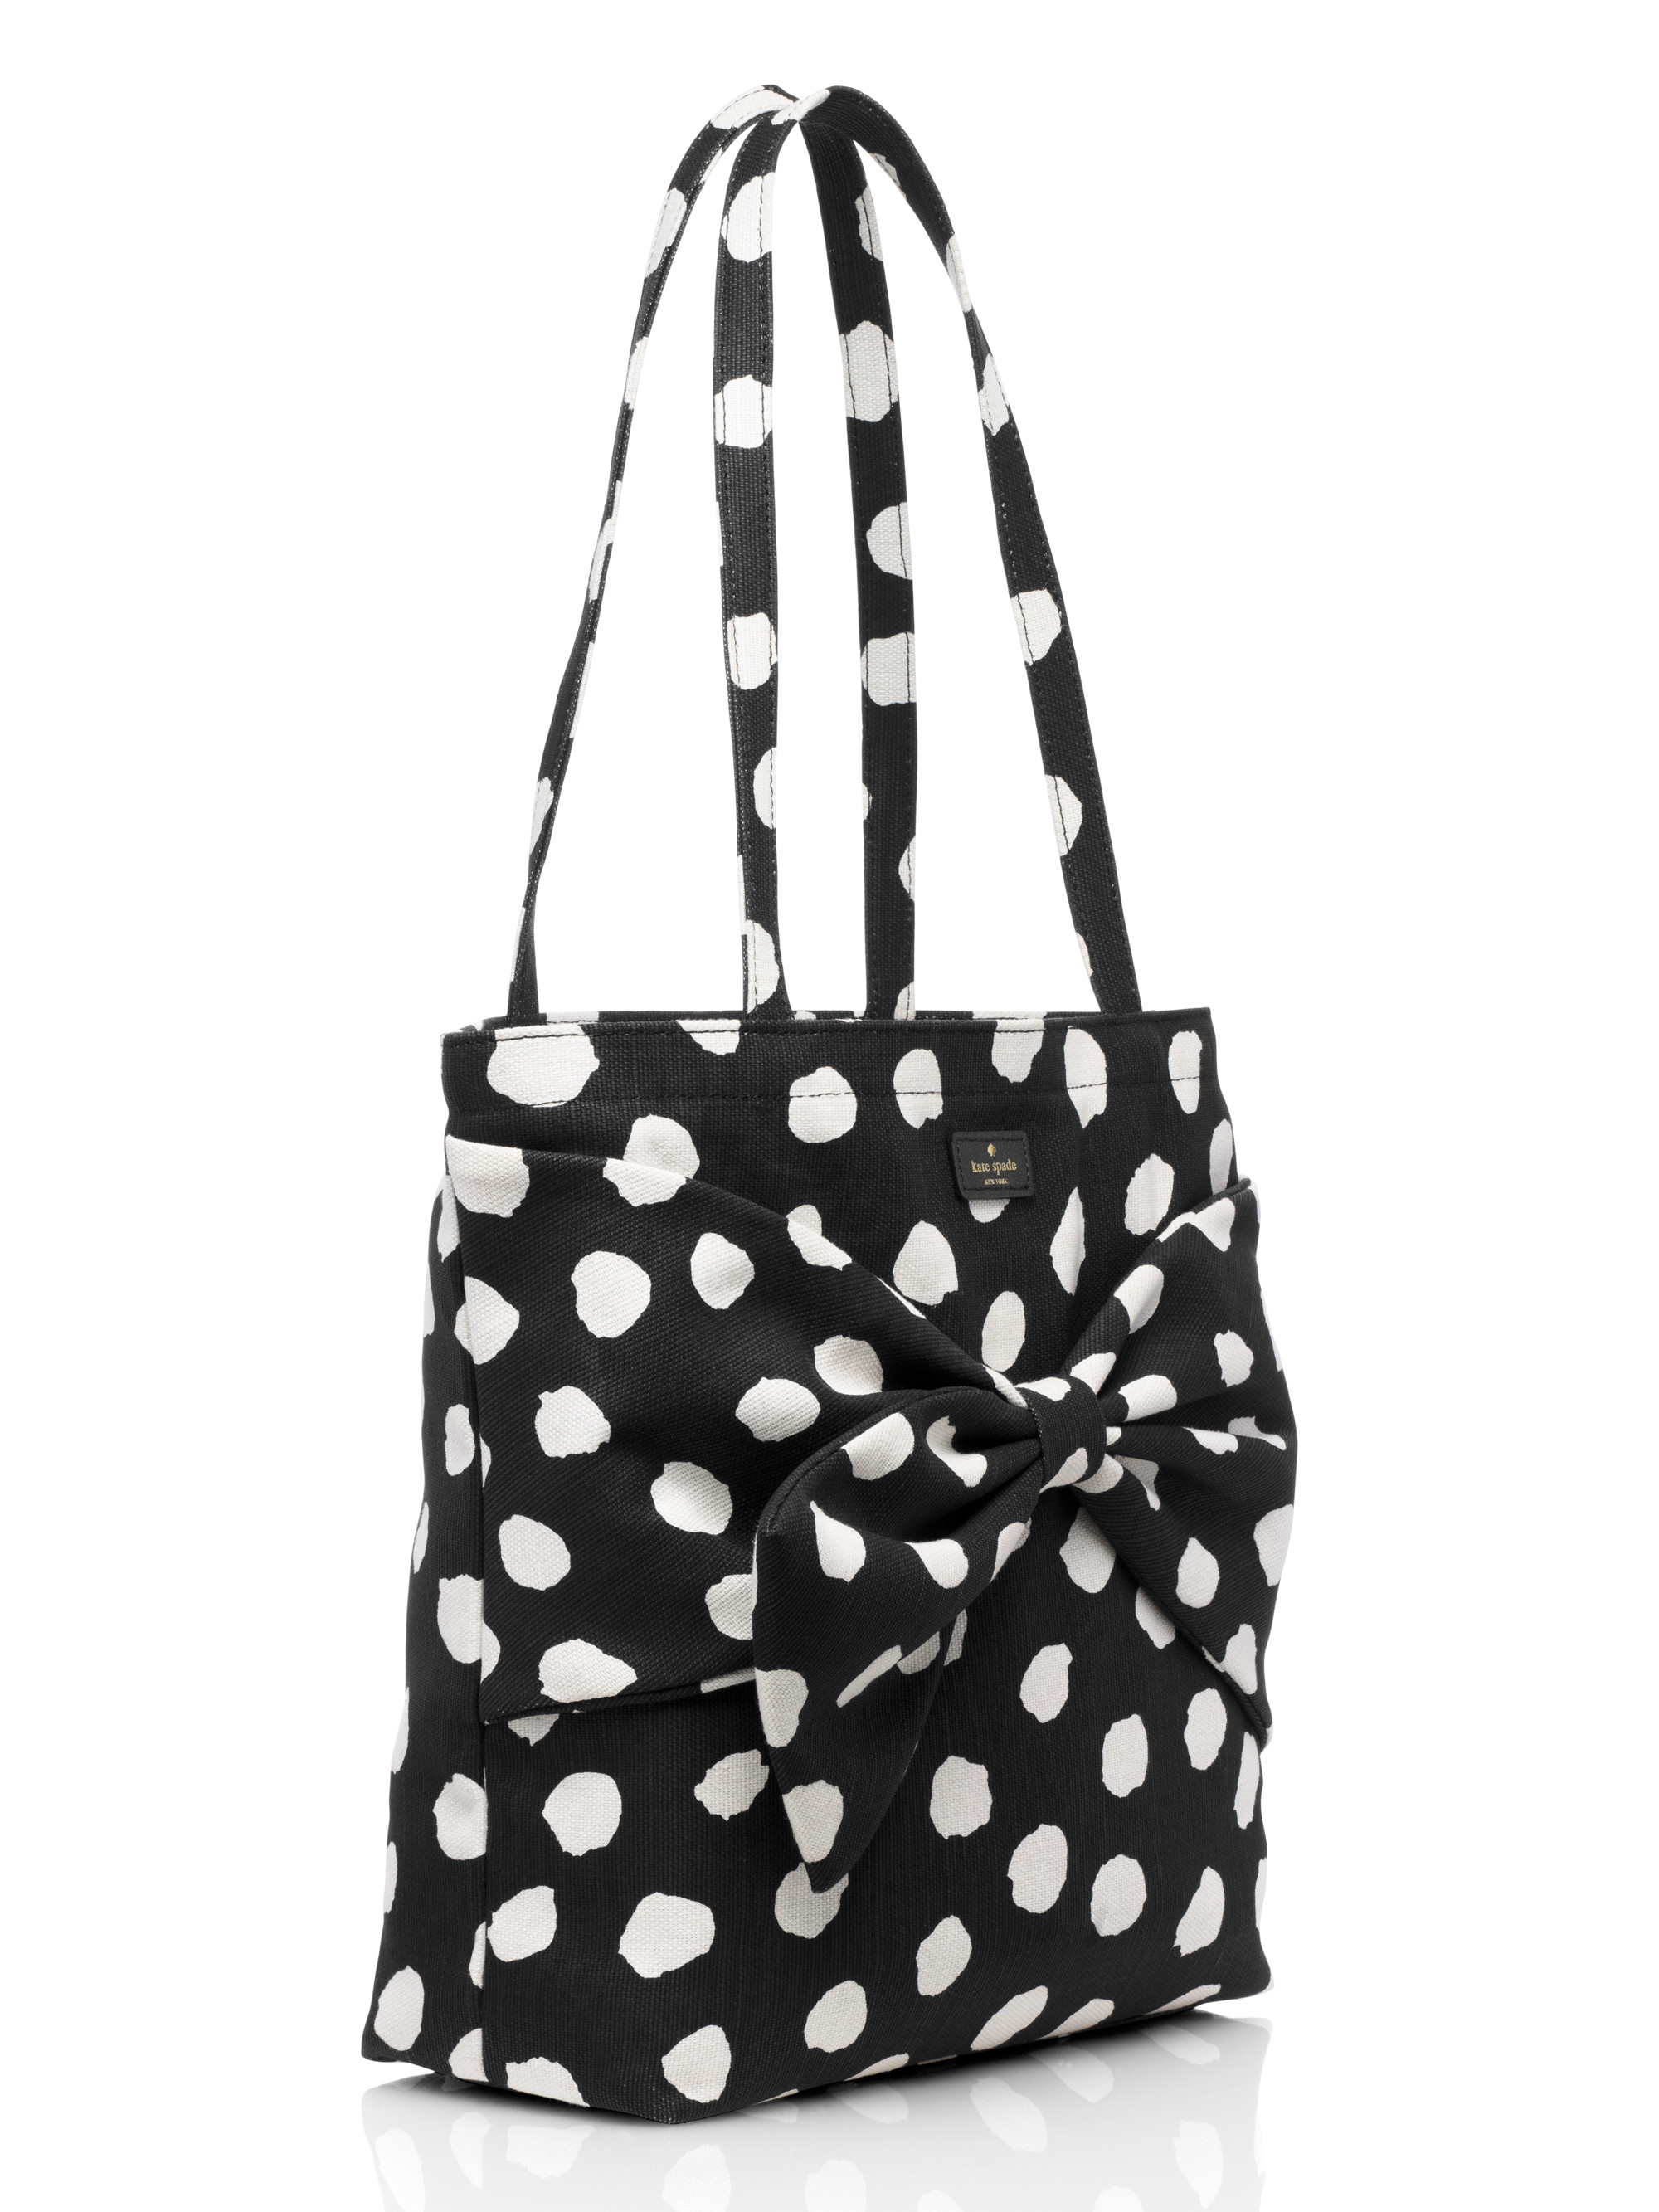 Kate Spade On Purpose Canvas Tote in Black Dot (White) - Lyst